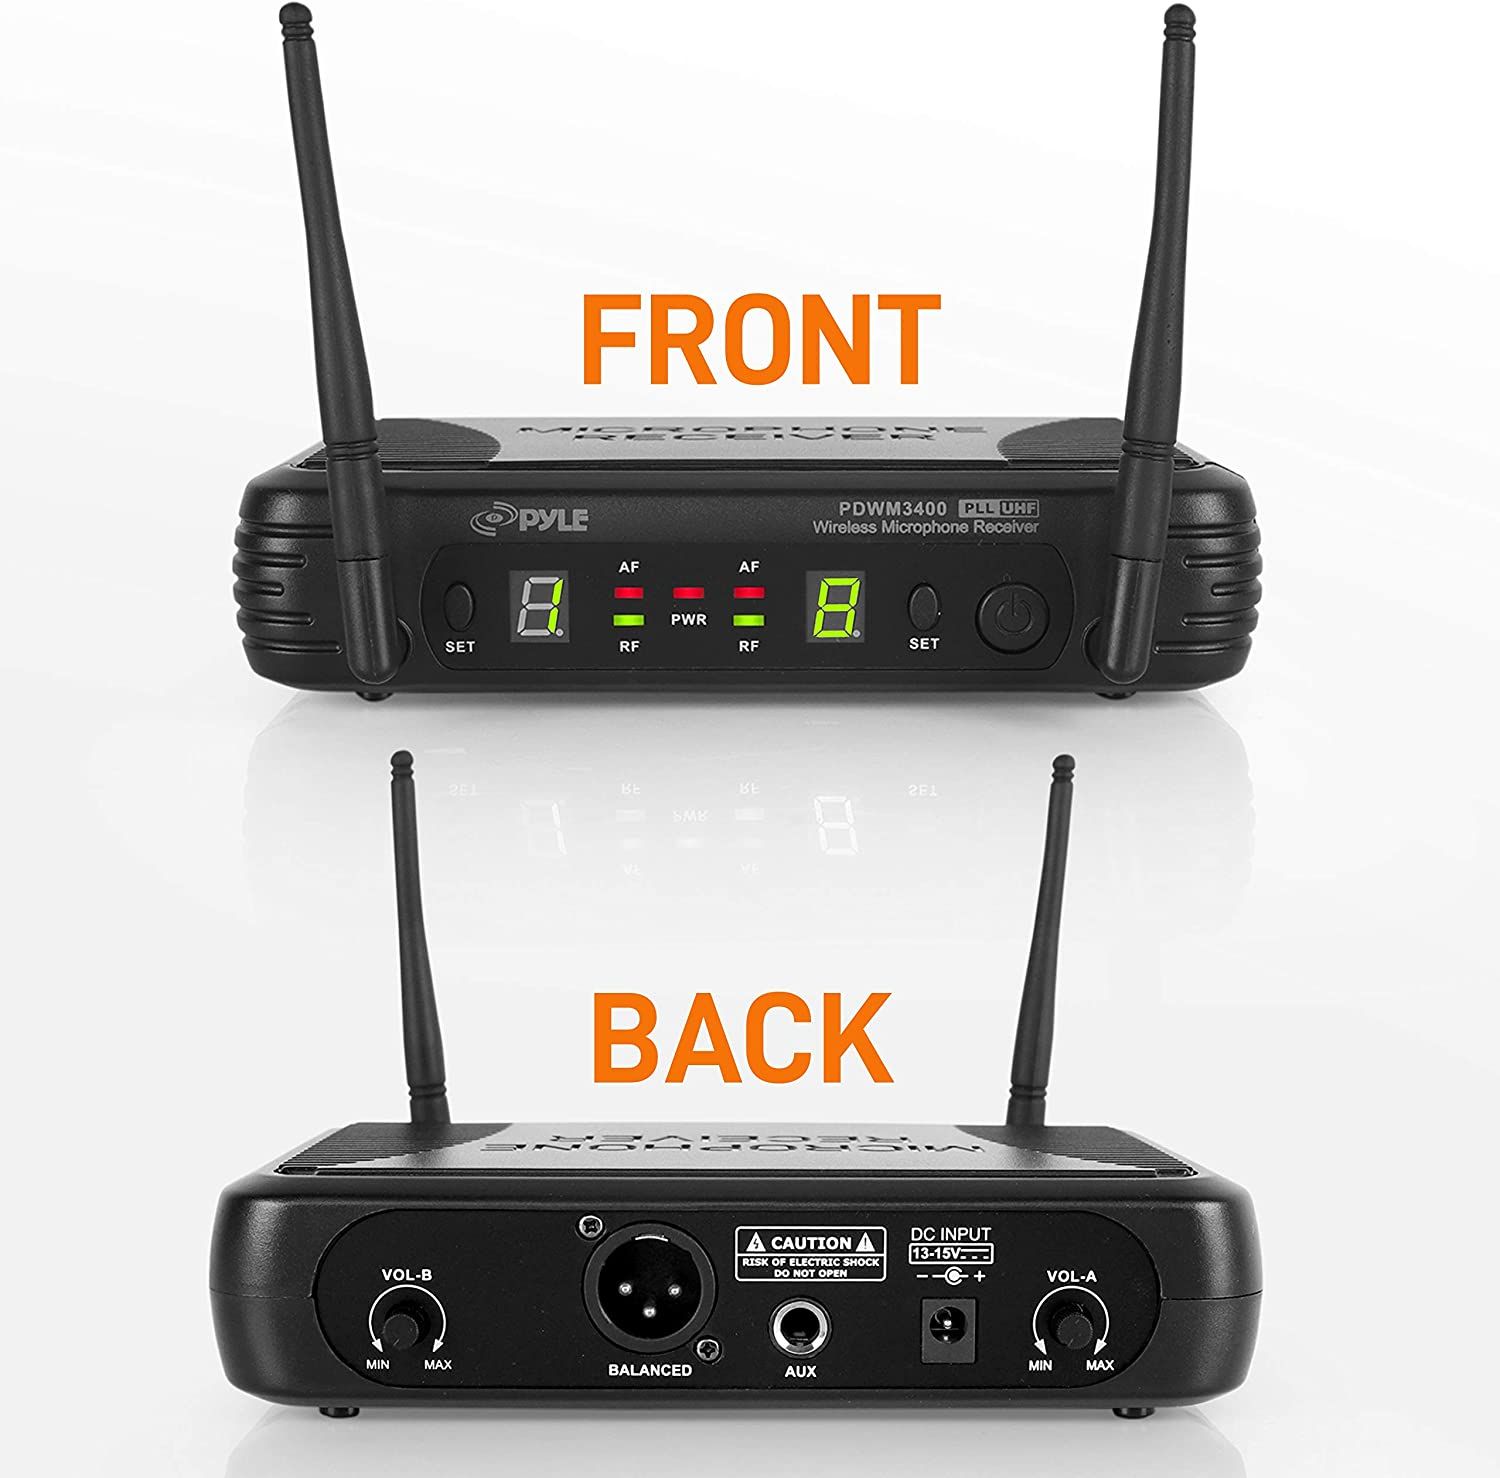 Pyle 2 Channel Wireless Microphone System front and back